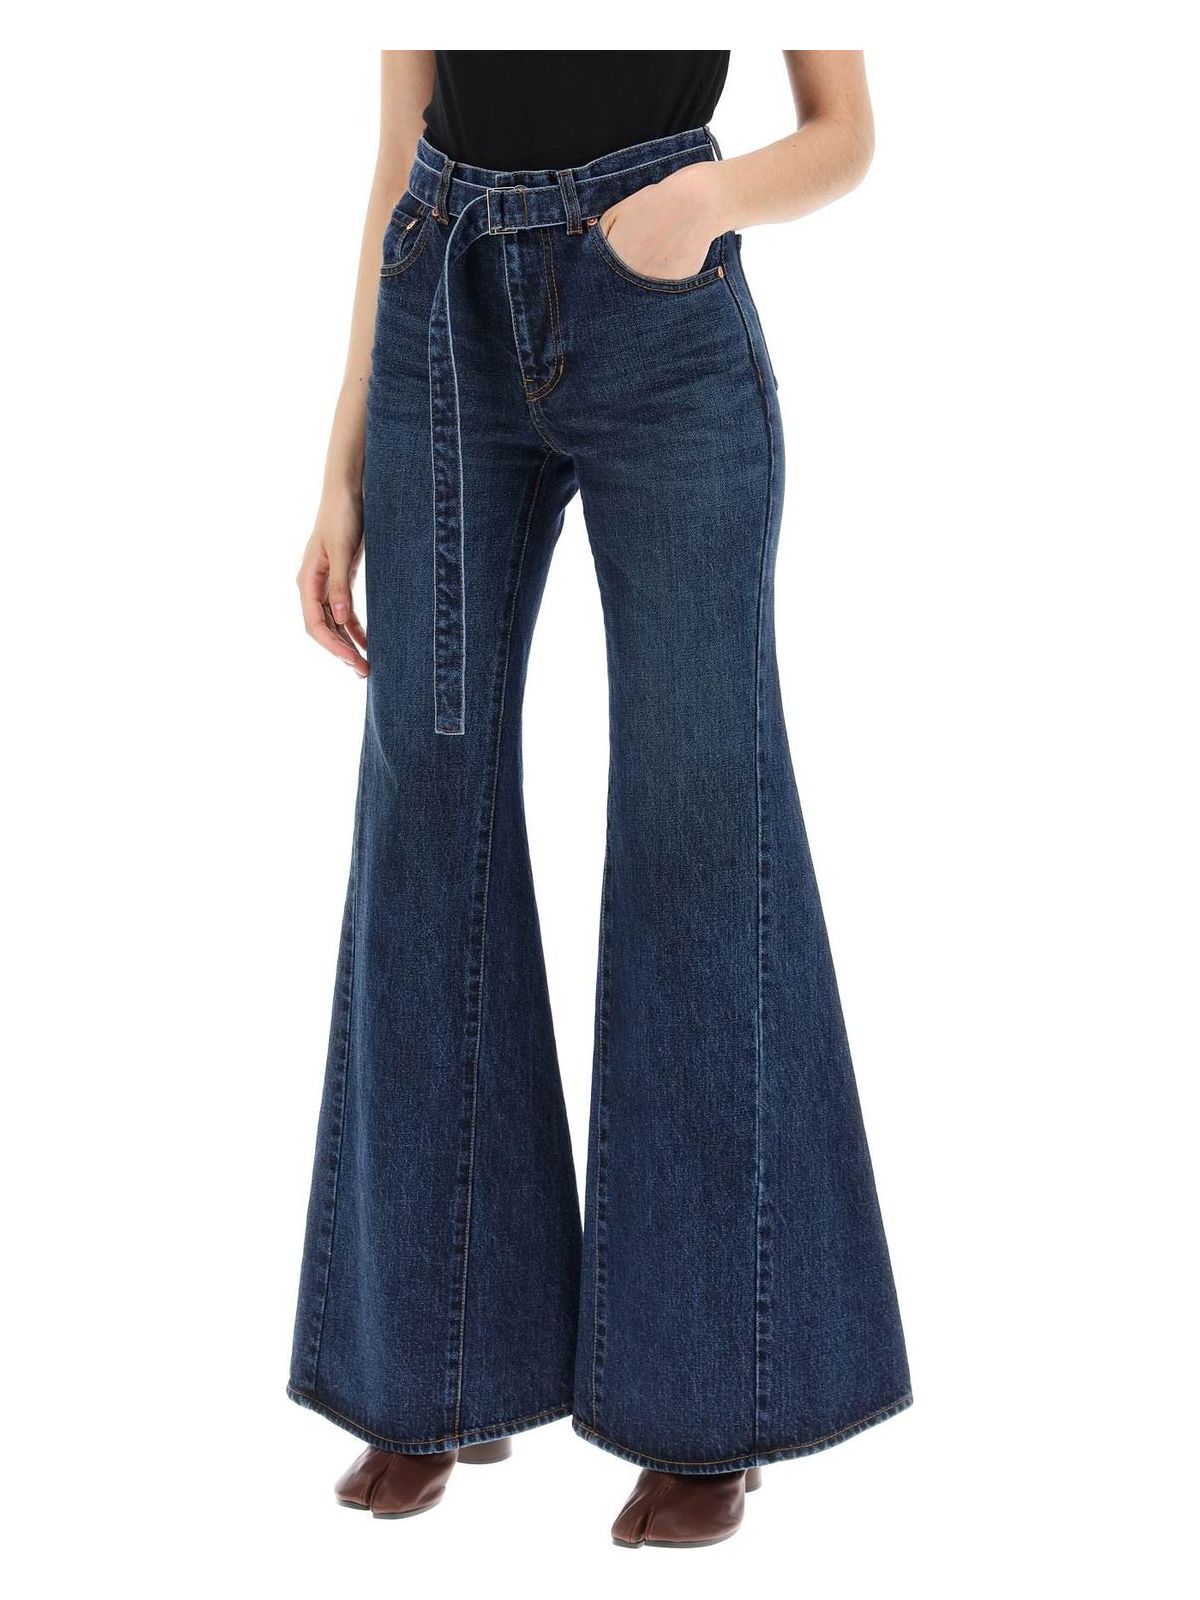 401 SACAI BOOT CUT JEANS WITH MATCHING BELT